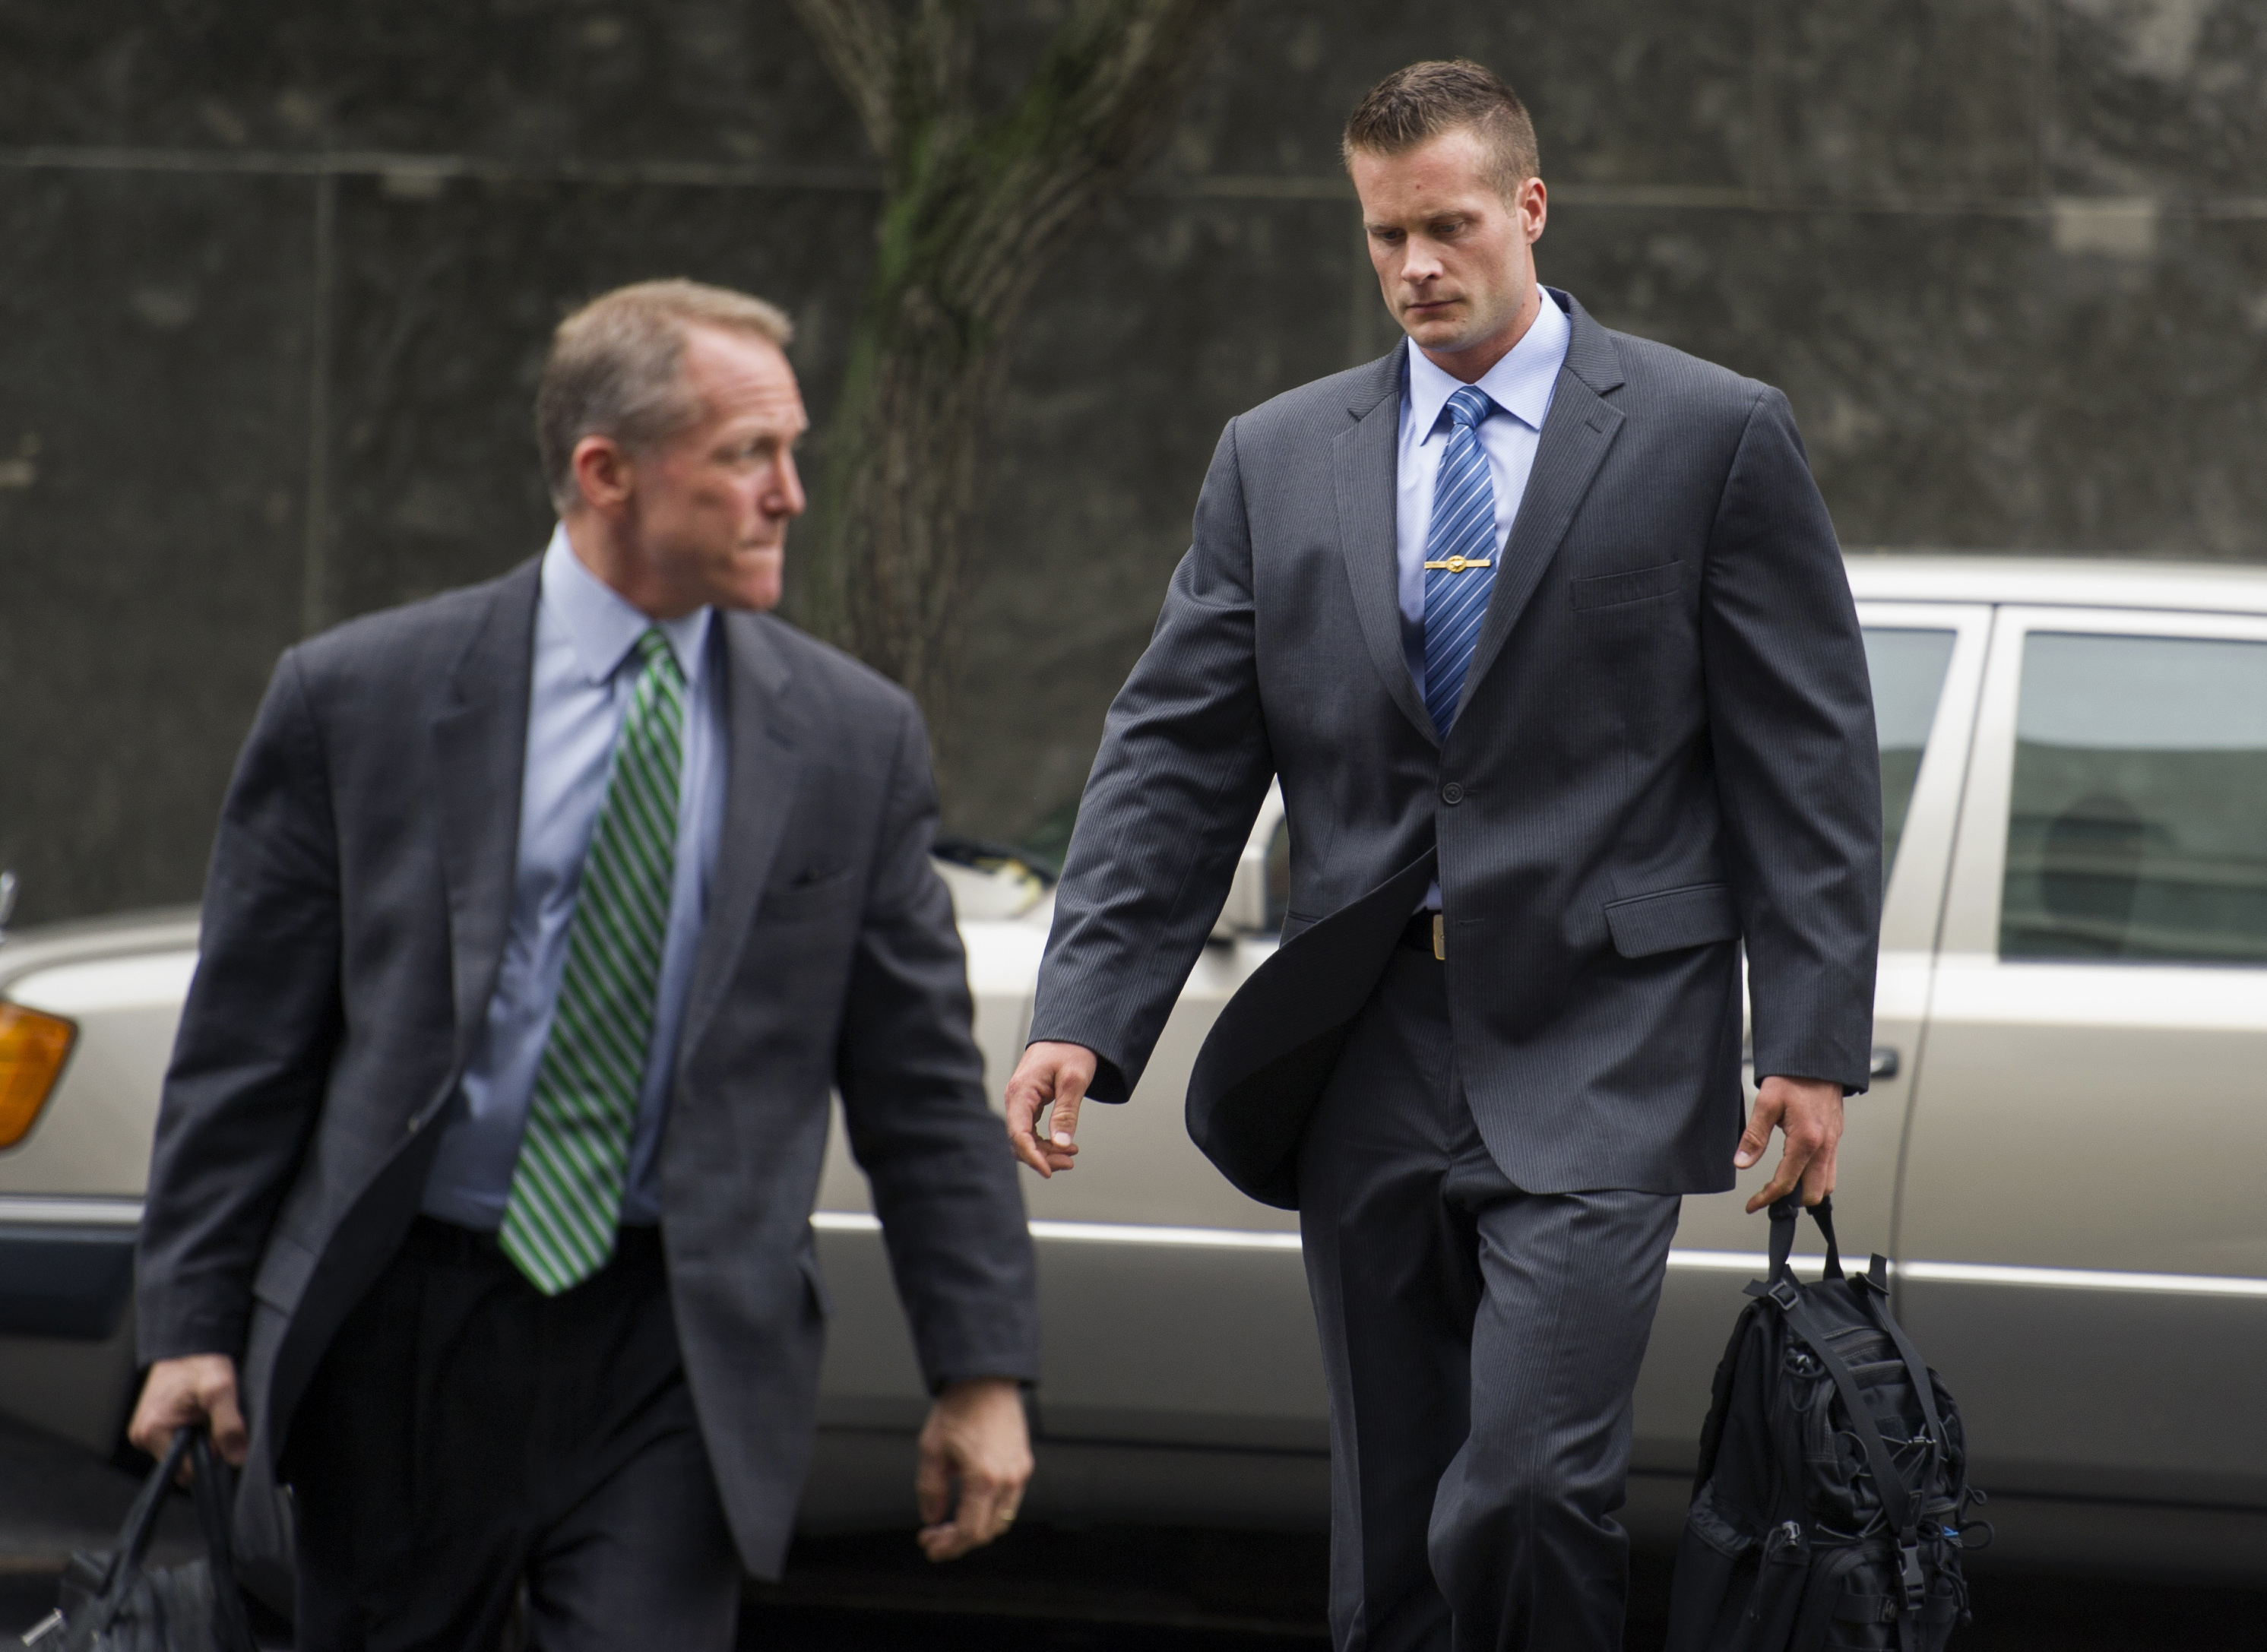 Former Blackwater guard Evan Liberty, right, arrives at a federal court in Washington to stand trial on June 11, 2014 (Cliff Owen—ASSOCIATED PRESS)